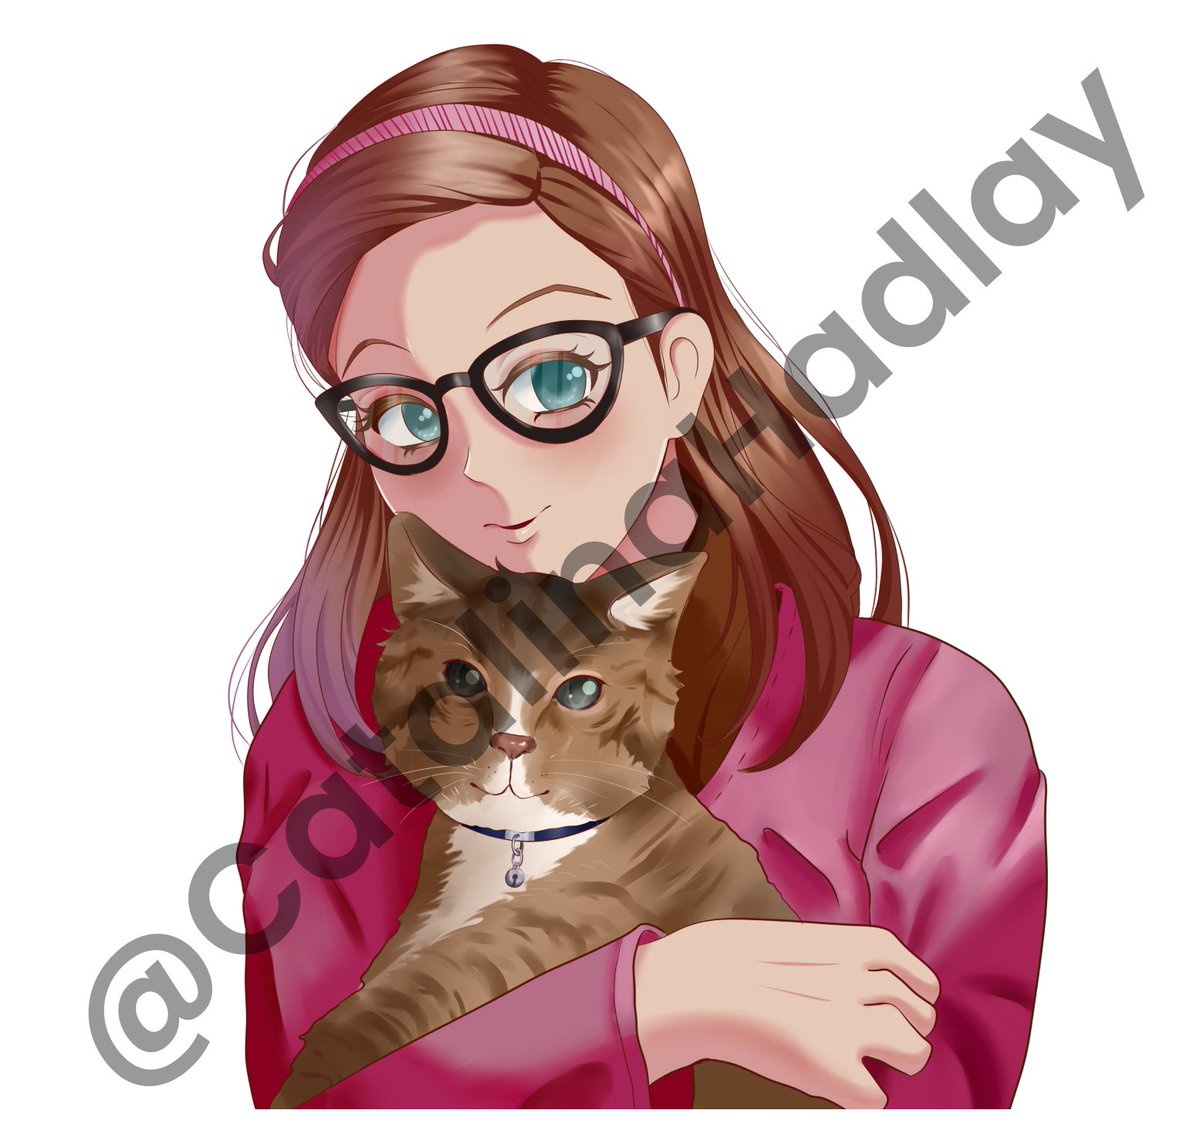 Half-body illustration done for my client with her cat
@Hyper5pace99 
.
.
.
.
She's the best client i have seen in my life <3
I'm very lucky to have a client like this 🥰🥰
#Catartwork #Catillustration #Halfbodyillustration #ilustration #digitalart #digitalartwork #CatAndOwnerArt